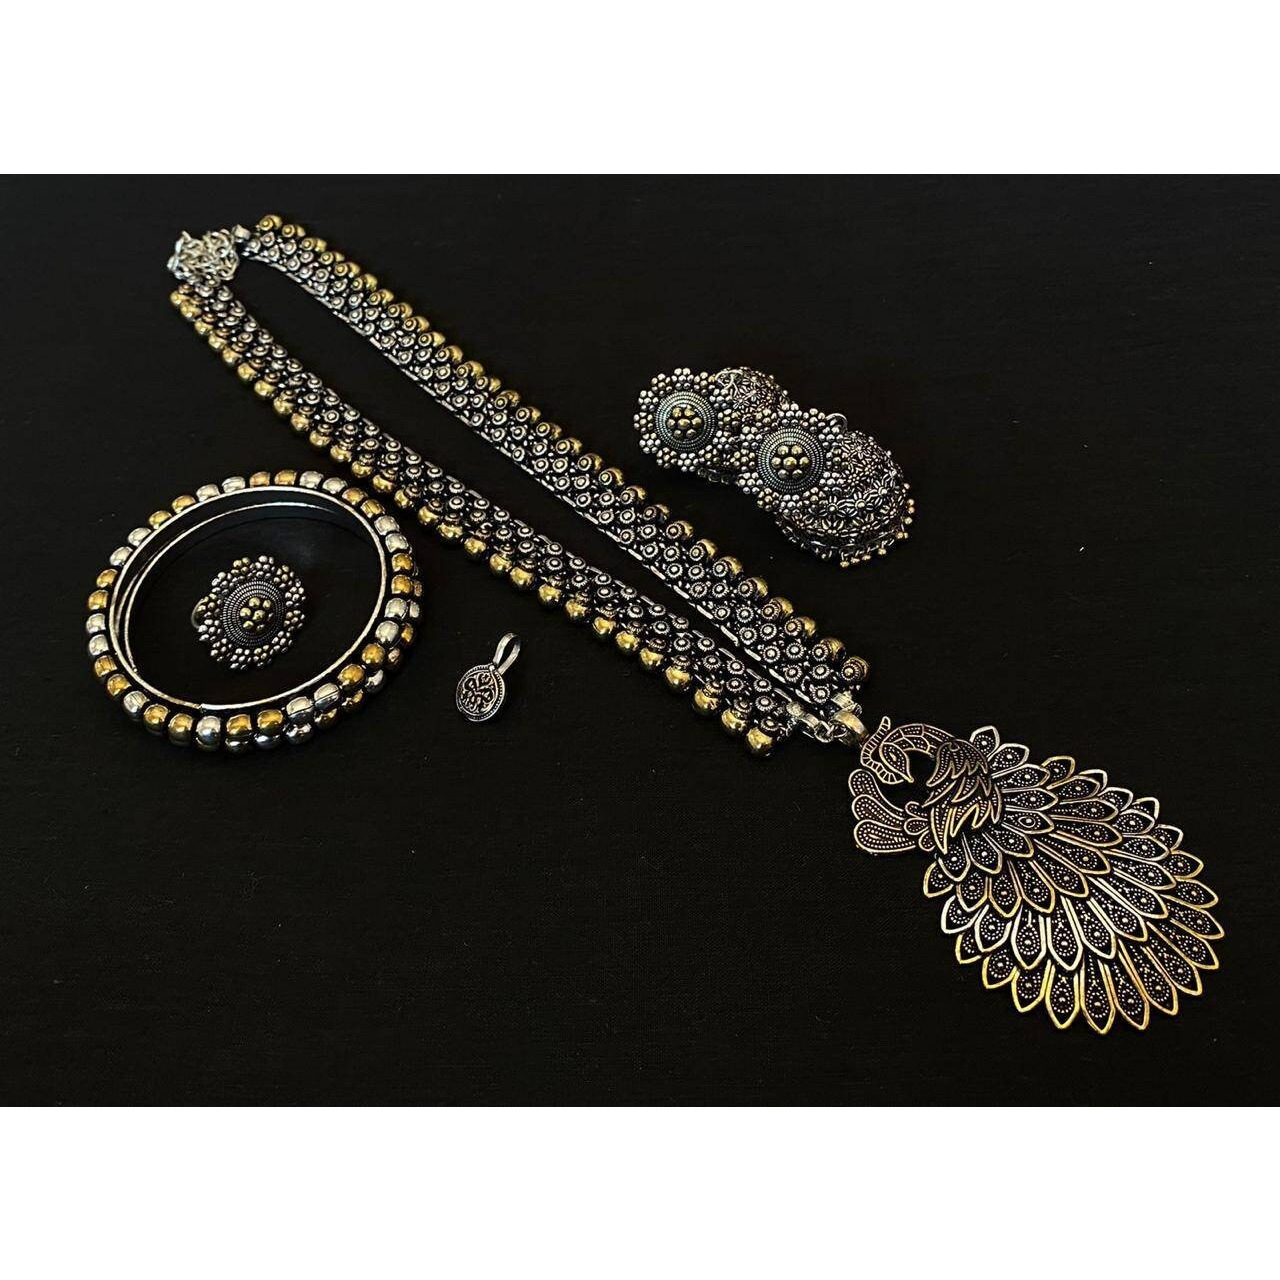 These beautiful peacock earrings in silver polish looks great with your casual/partywear dresses. All our earrings are handcrafted to perfection so that it can enhance the beauty of the woman.I am sure once you try you will always buy from us as we give genuine quality products, if you value quality then you can't miss these.